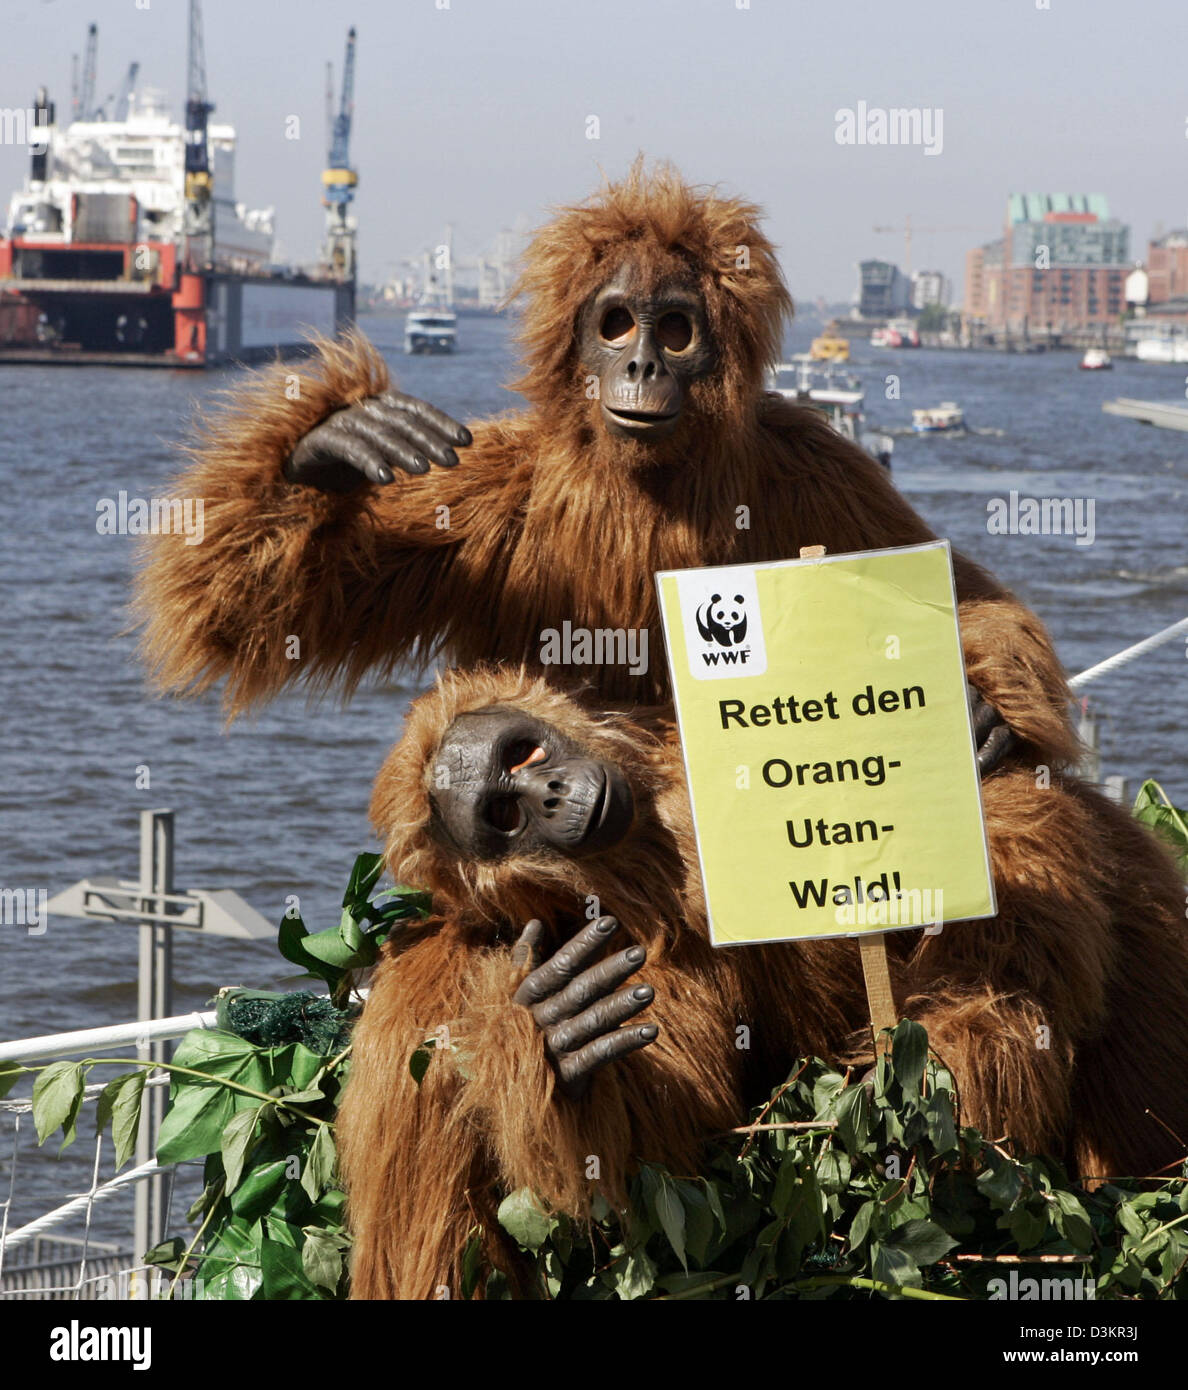 (dpa) - Two environmental campaigners dressed up as orang-utans protest against the destruction of rain forest on board windjammer 'Rickmers Rickmers' moored in the harbour of Hamburg, Germany, Thursday 18 August 2005. The 'apes' are part of aWorld Wide Fund For Nature (WWF) campaign against clear-cutting and poaching in Indonesia. The 'orang-utans' visit roundly 60 German cities.  Stock Photo